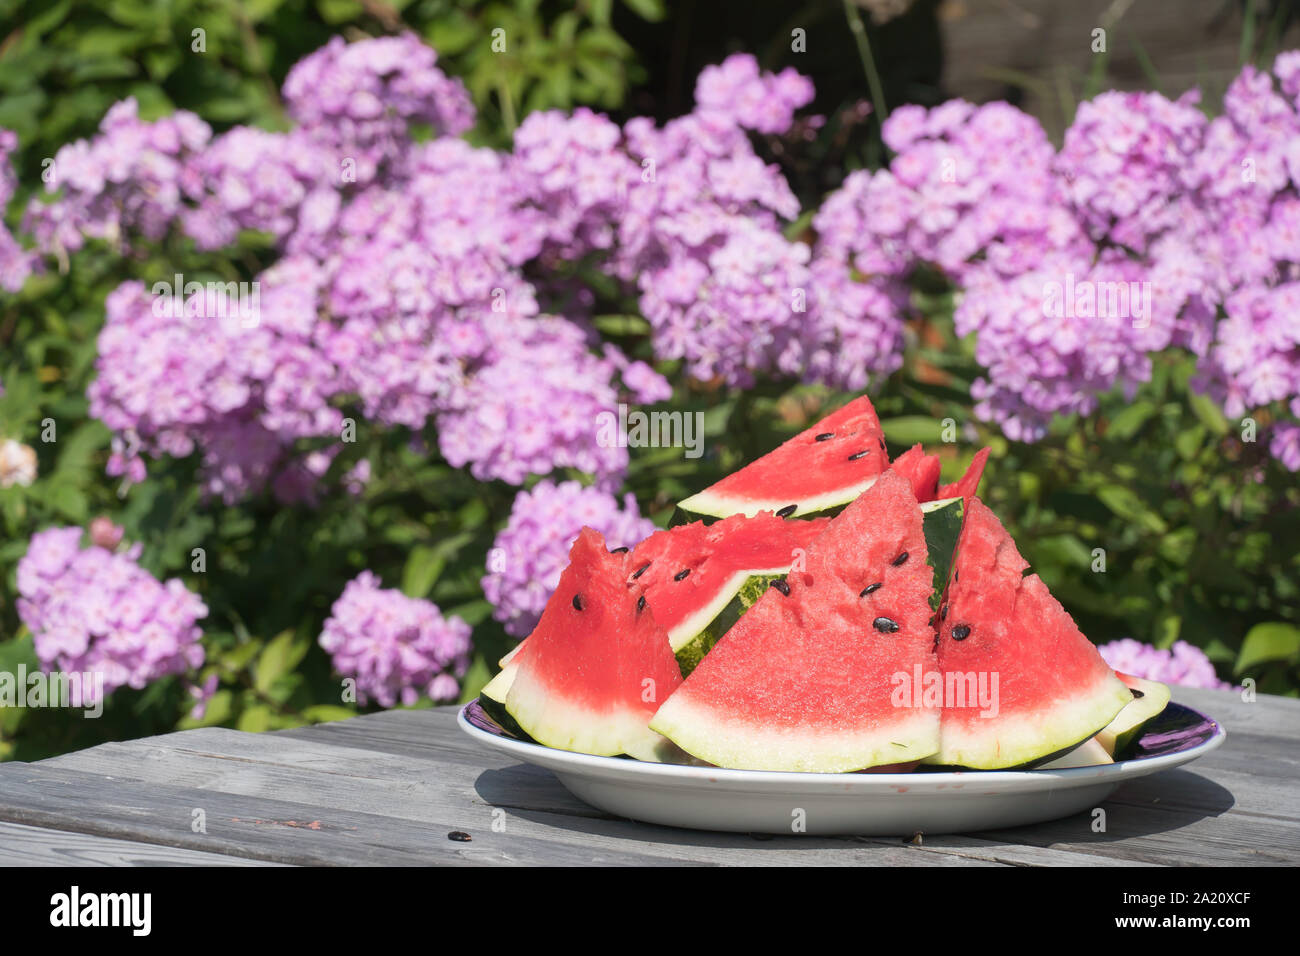 Big sliced watermelon against natural background with flowers on a table in a garden Stock Photo